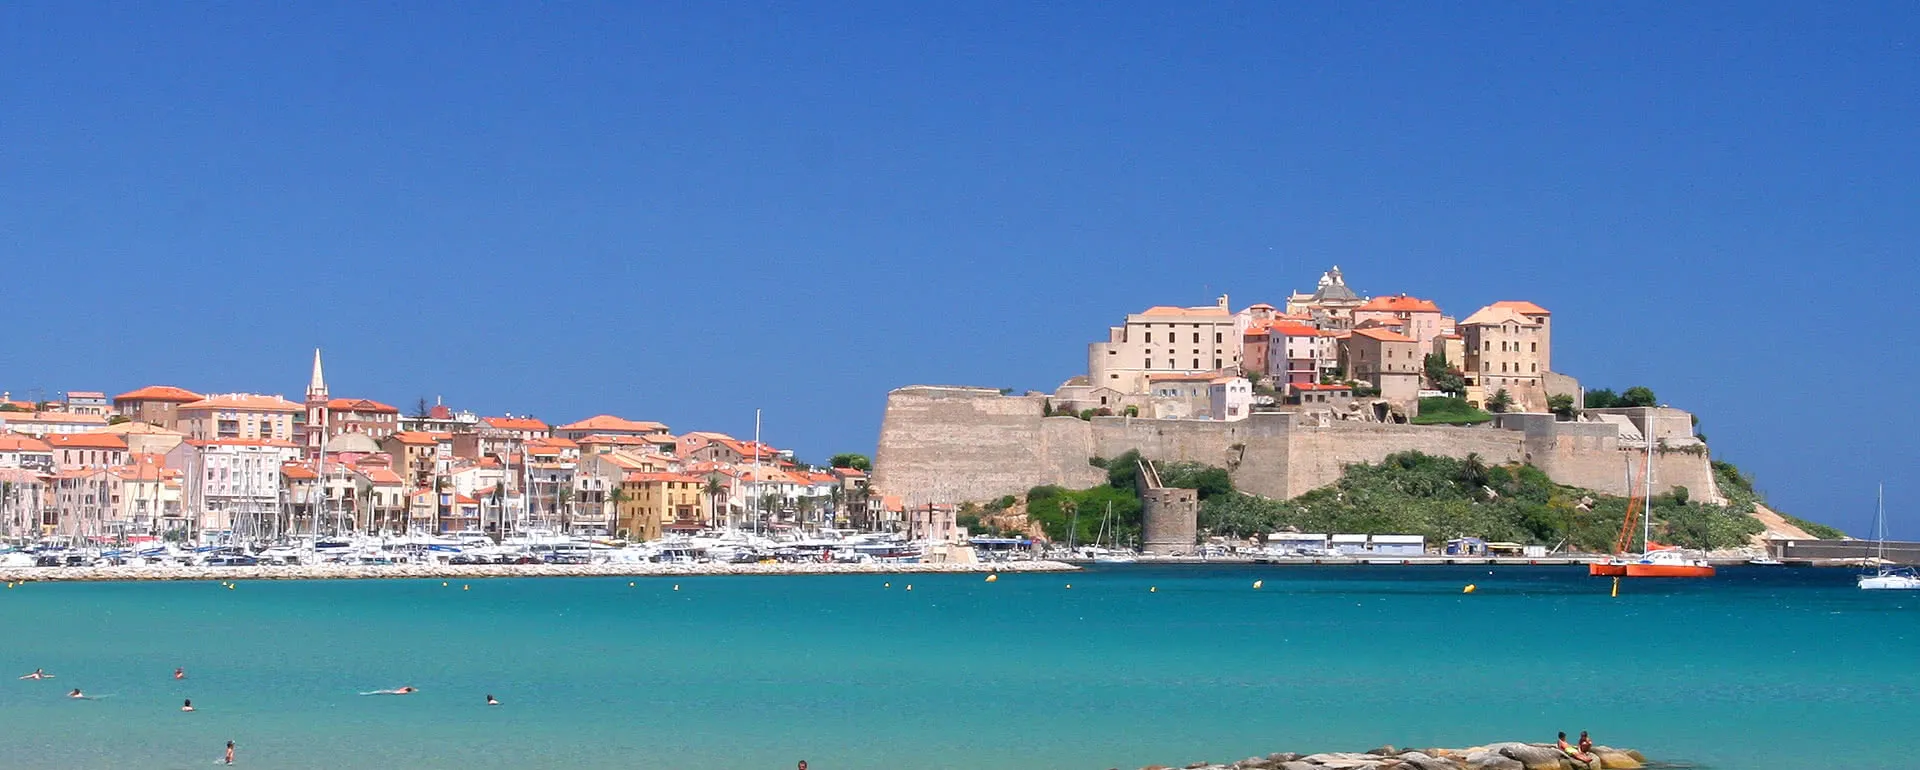 Calvi - the destination for group hotel with internet